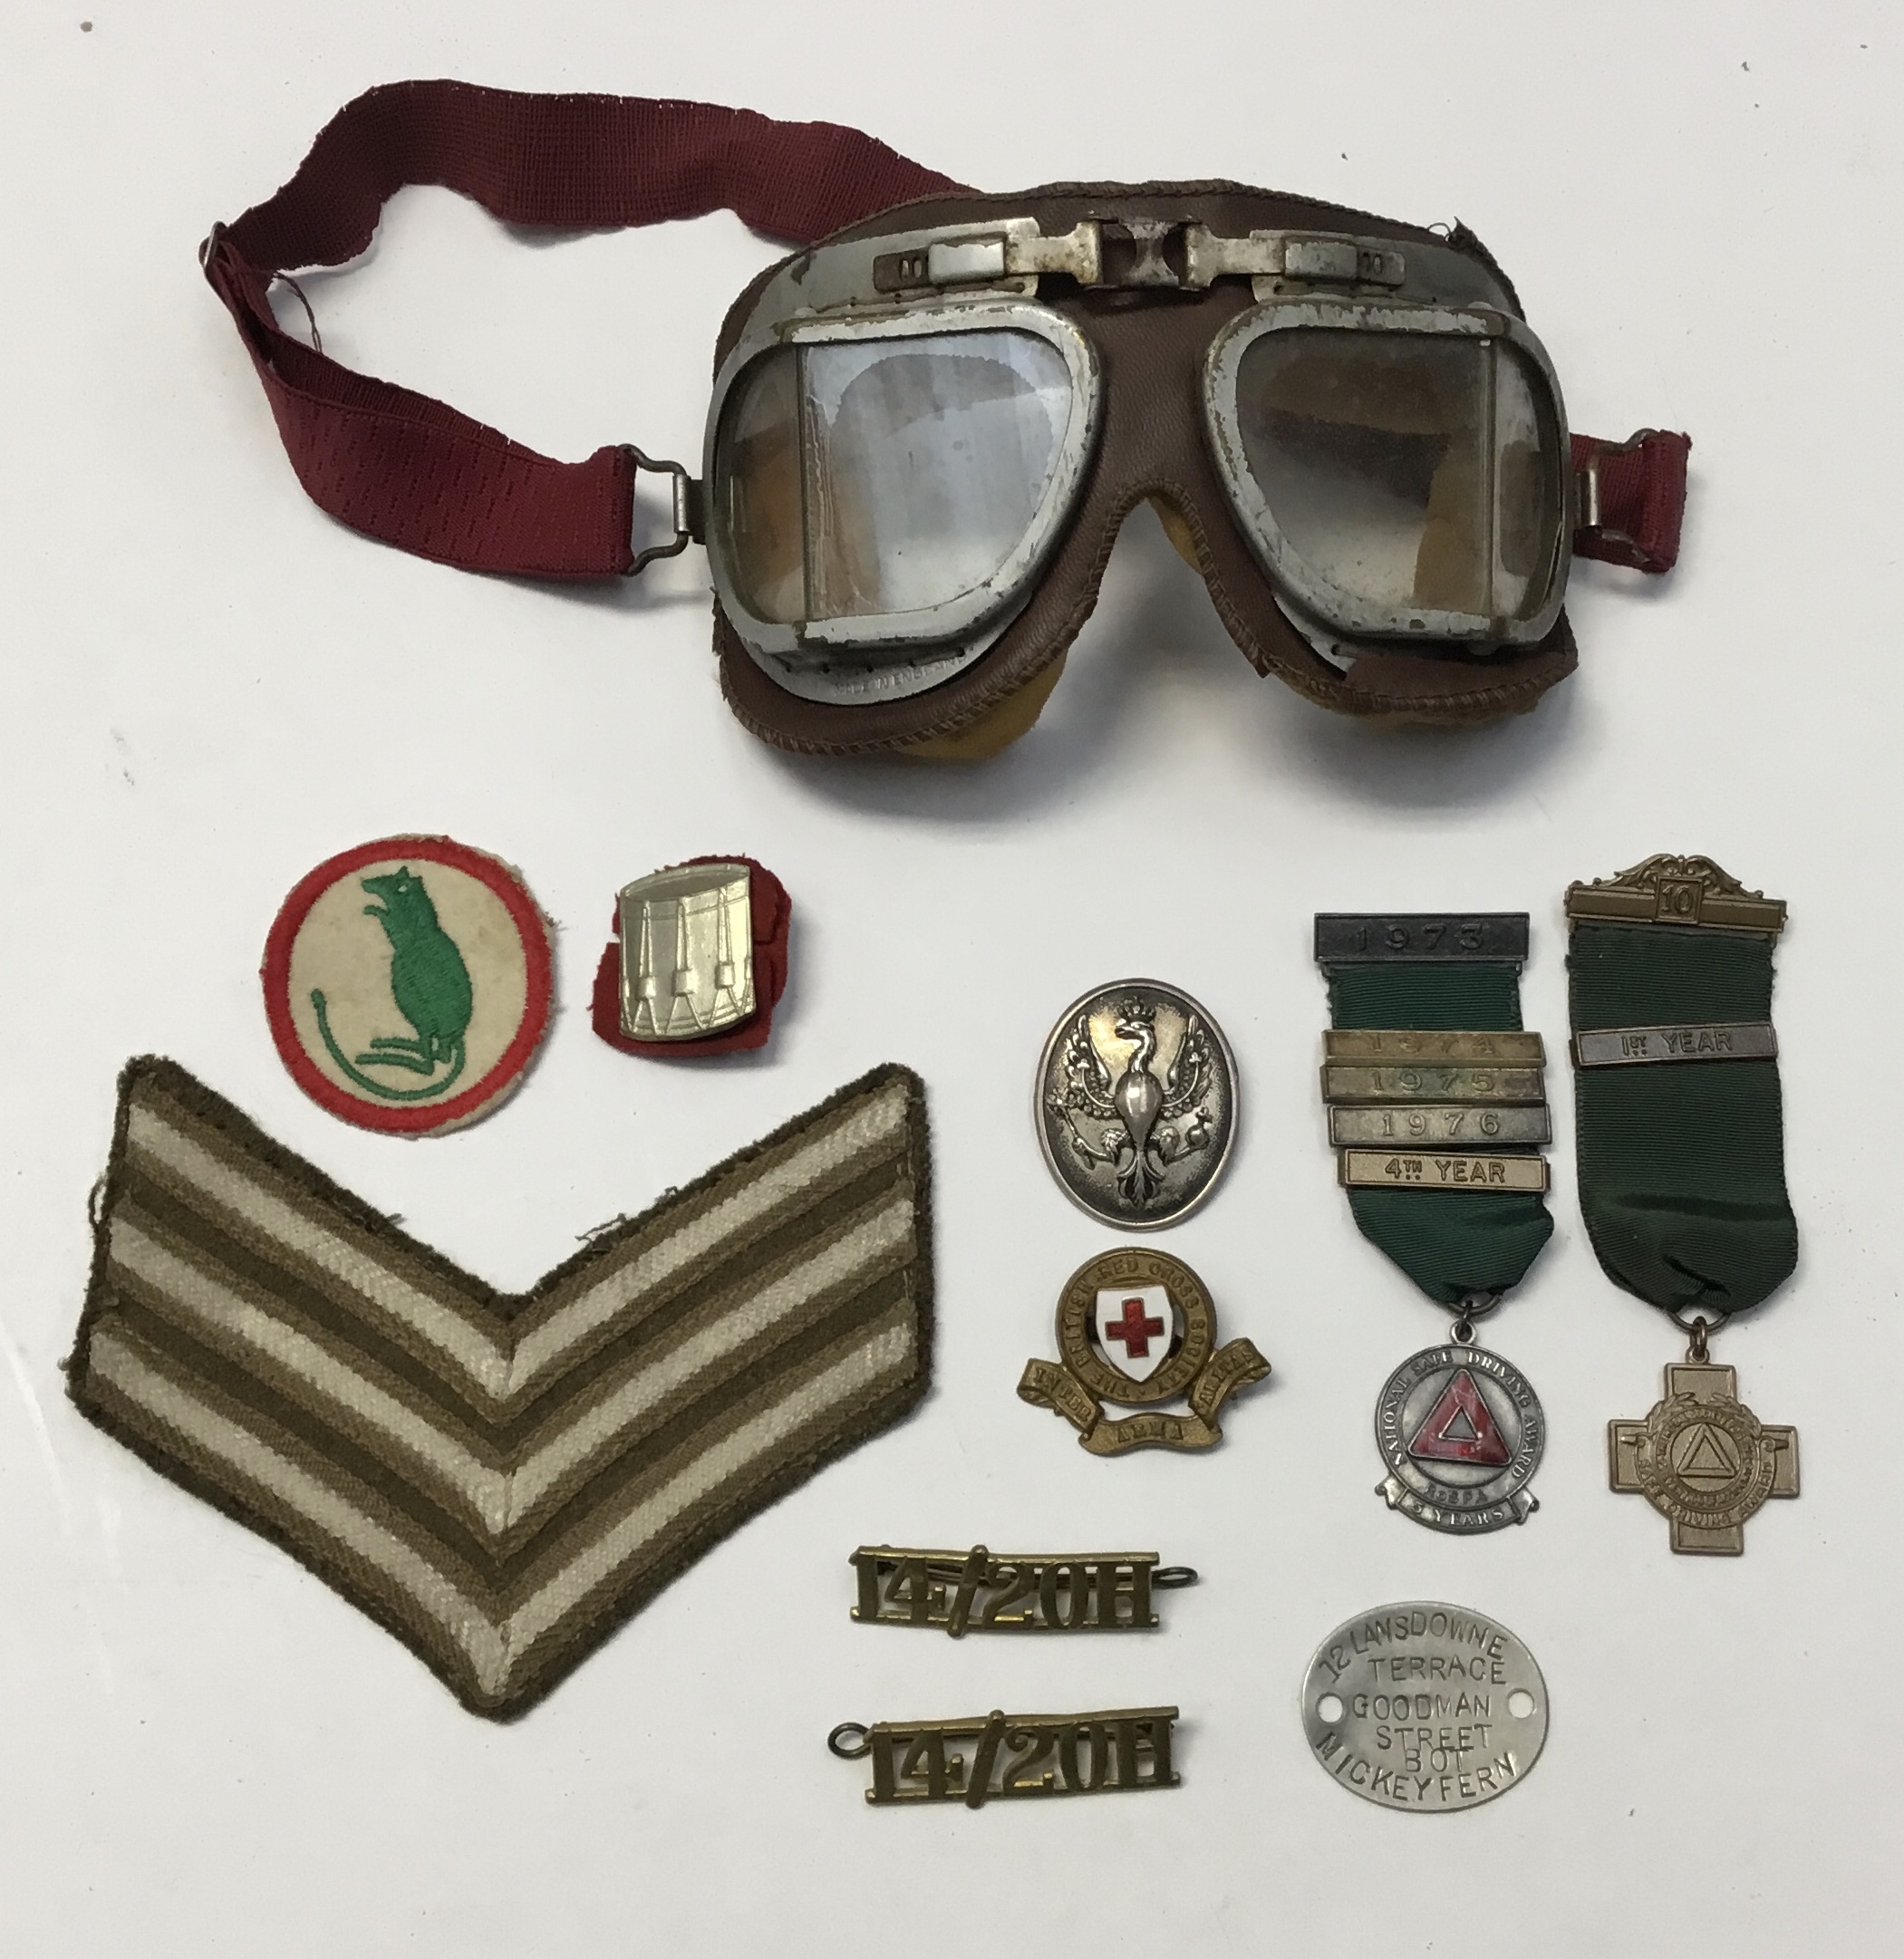 A selection of WW2 and post war badges and patches, plus other items related to Michael Fern of